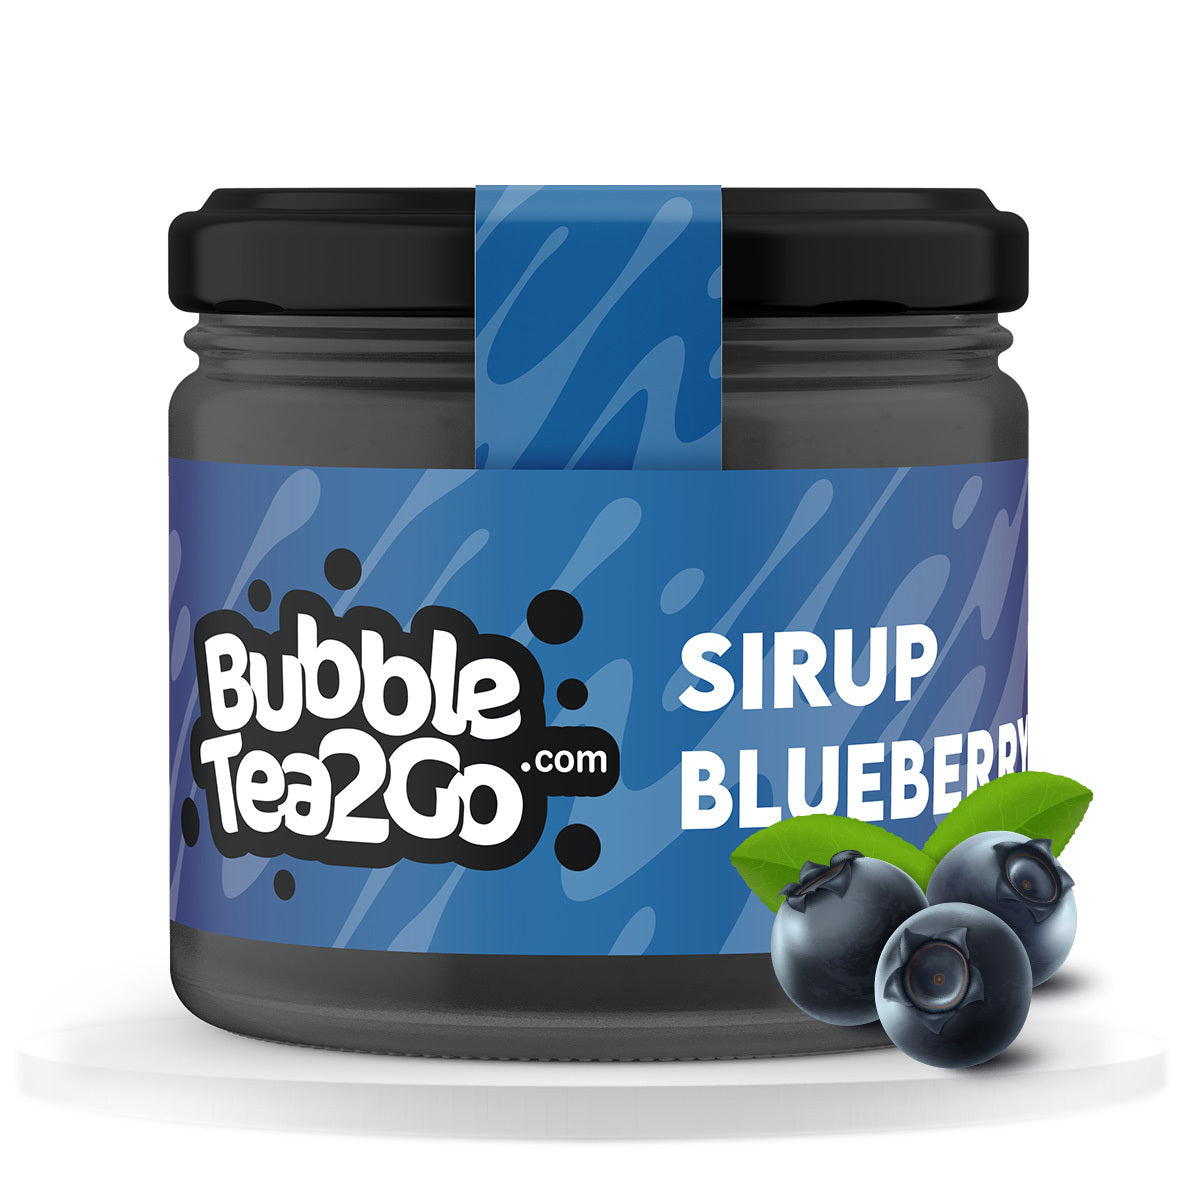 Syrup - Blueberry 2 servings (50g)